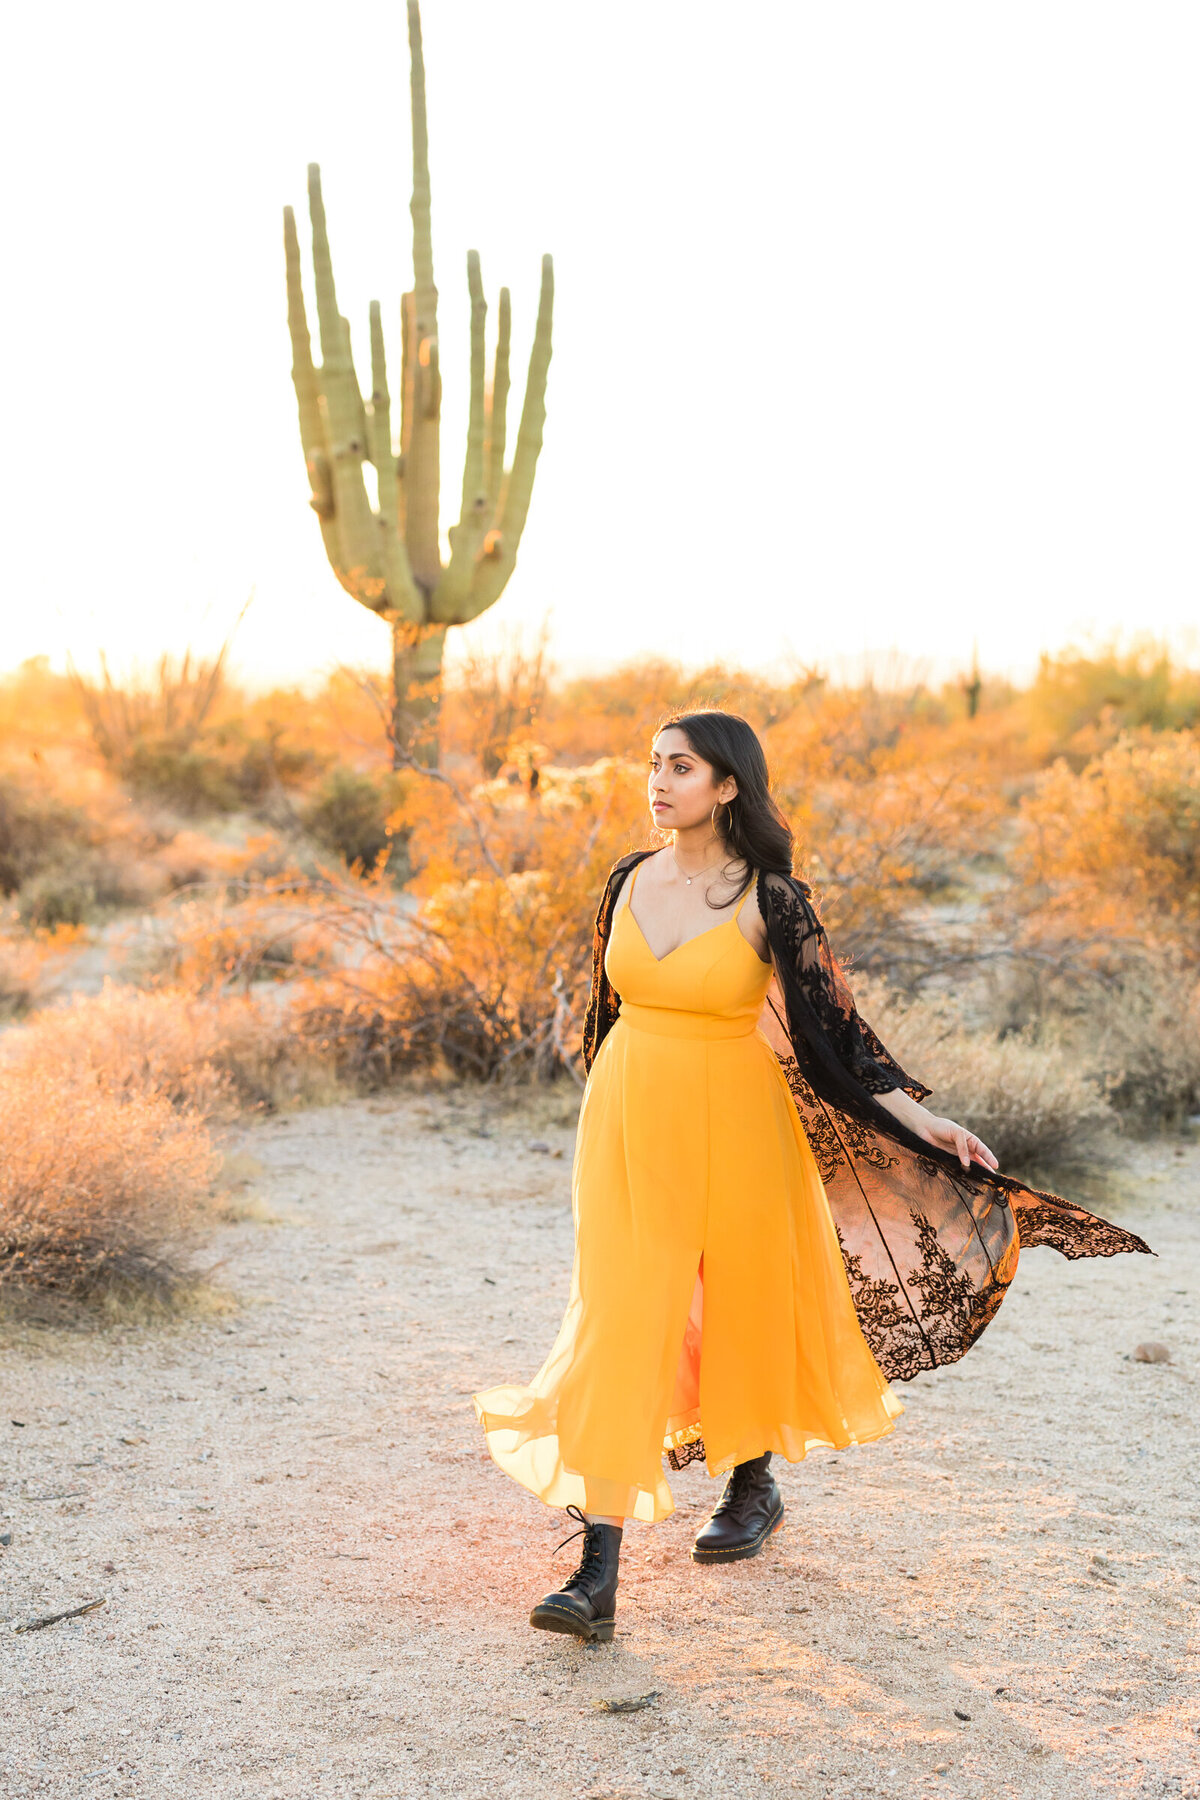 fashion portrait of woman in the desert